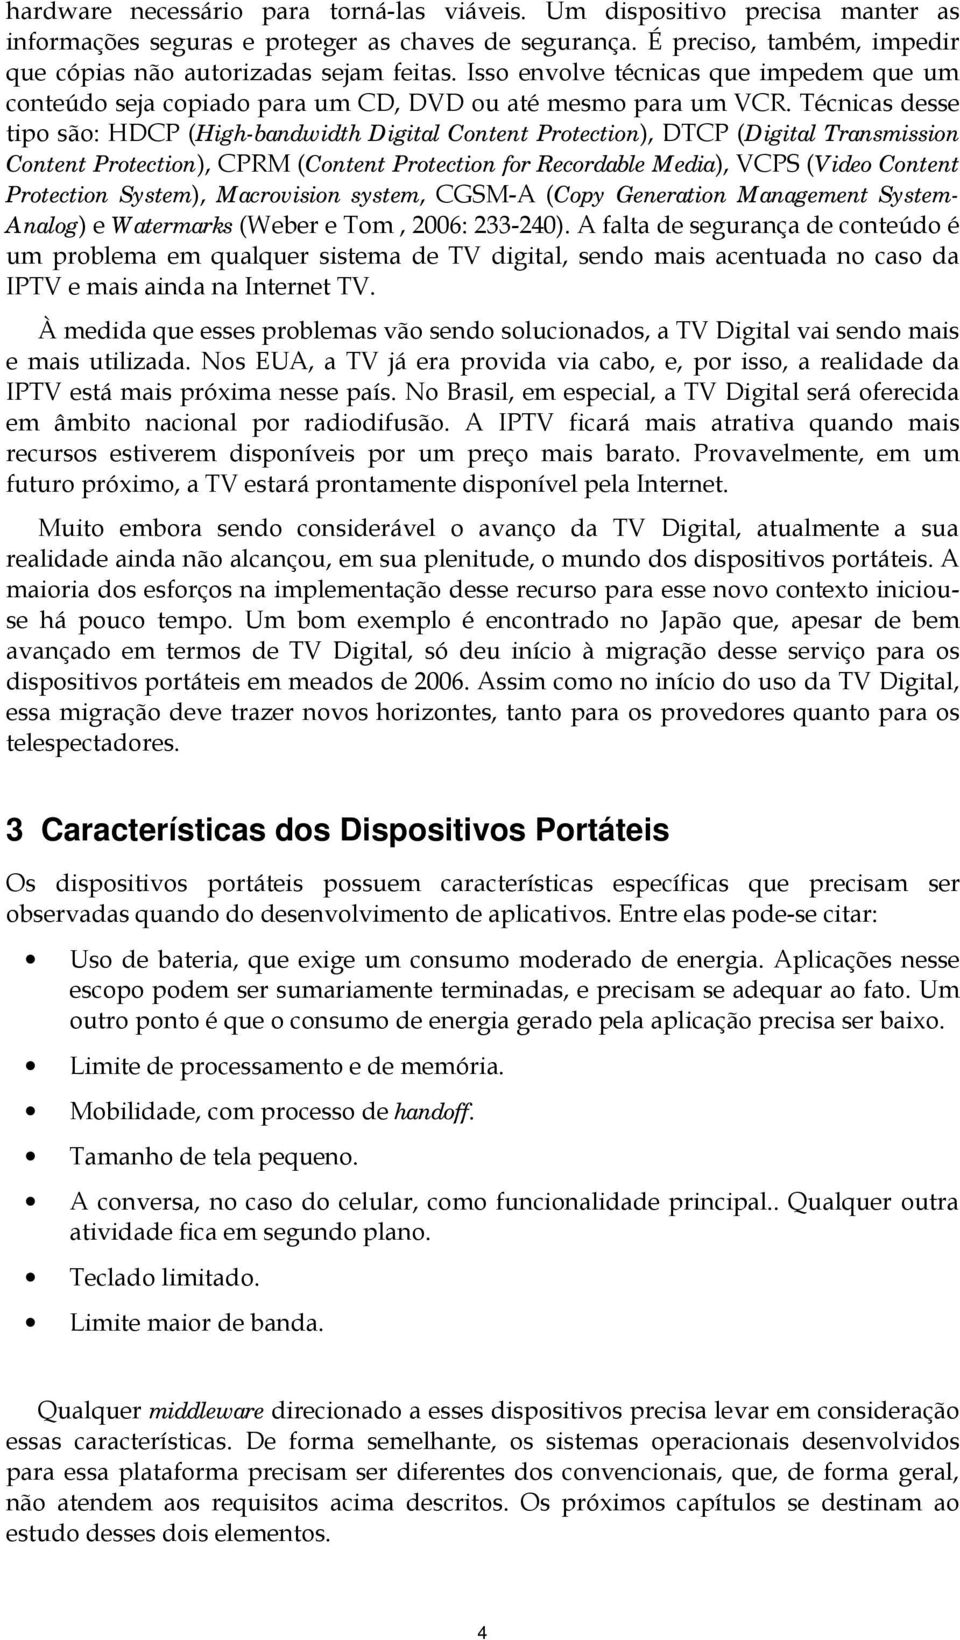 Técnicas desse tipo são: HDCP (High-bandwidth Digital Content Protection), DTCP (Digital Transmission Content Protection), CPRM (Content Protection for Recordable Media), VCPS (Video Content